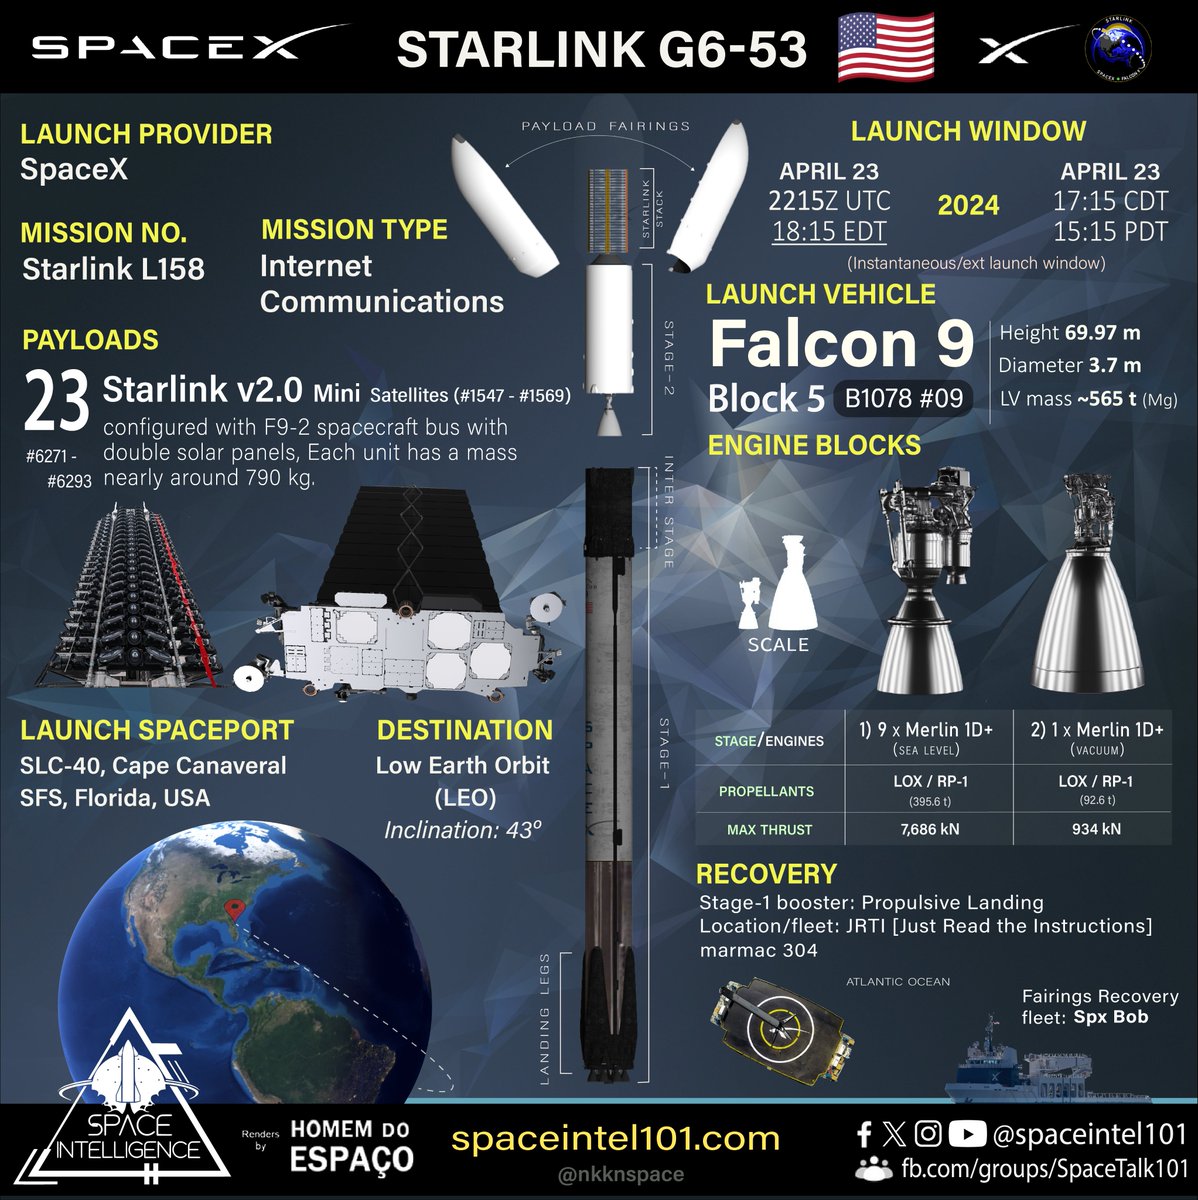 Orbital launch no. 77 of 2024 🇺🇲🚀⭐🔗🛰️➕

Starlink L158 | SpaceX | April 23 | 2215 UTC

@SpaceX's 28th #Starlink mission of 2024 to launch 23 v2.0 @Starlink Mini🛰️ on its #Falcon9 #B1078.9🚀 to 43° Low Earth Orbit from @SLDelta45 SLC-40, Cape Canaveral.
#SpaceX #capecanaveral